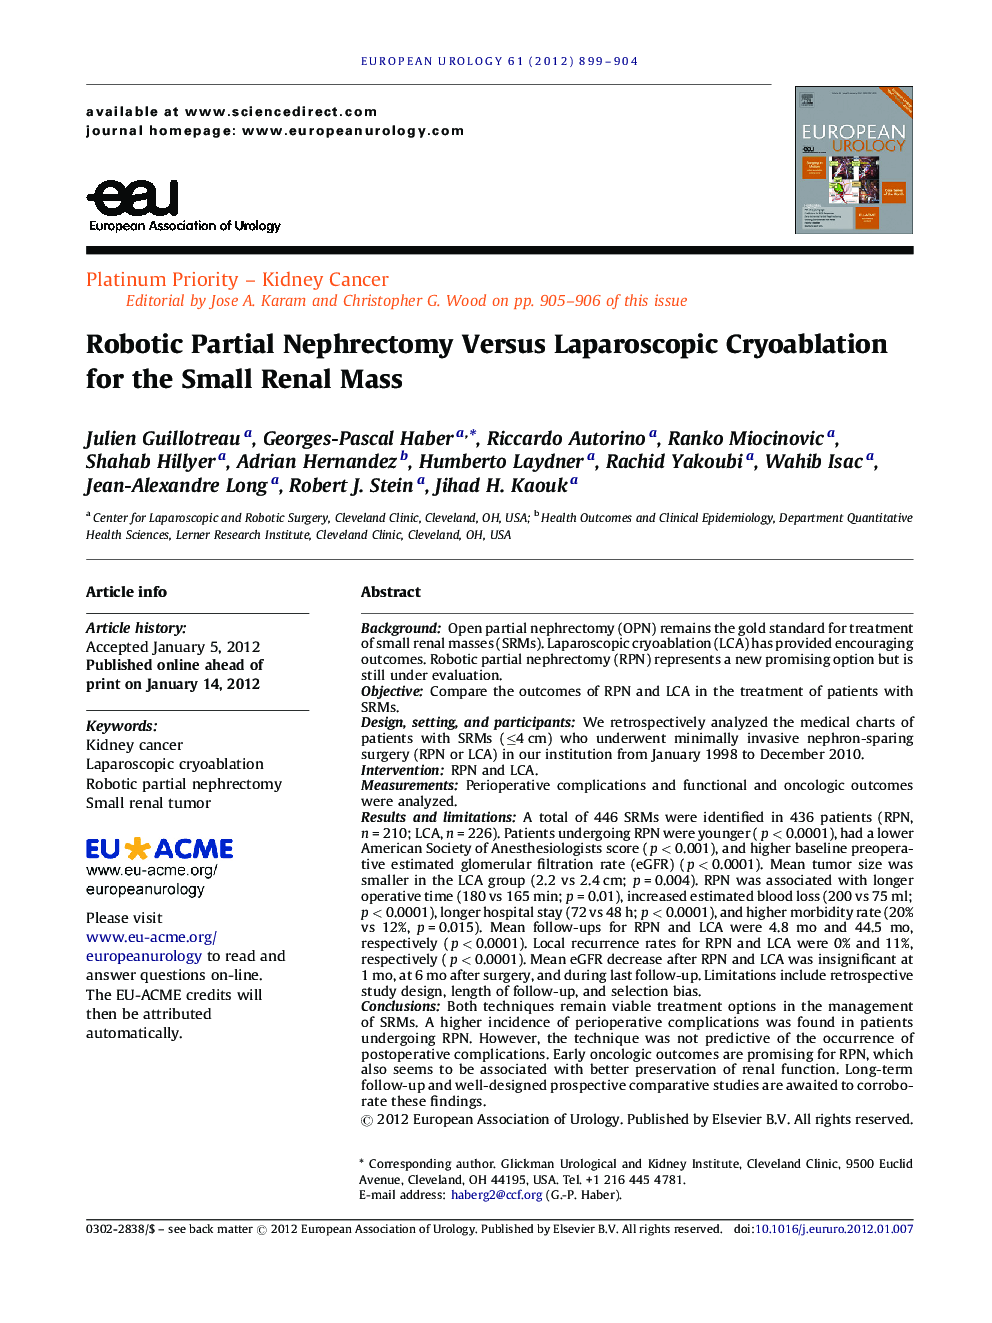 Robotic Partial Nephrectomy Versus Laparoscopic Cryoablation for the Small Renal Mass 